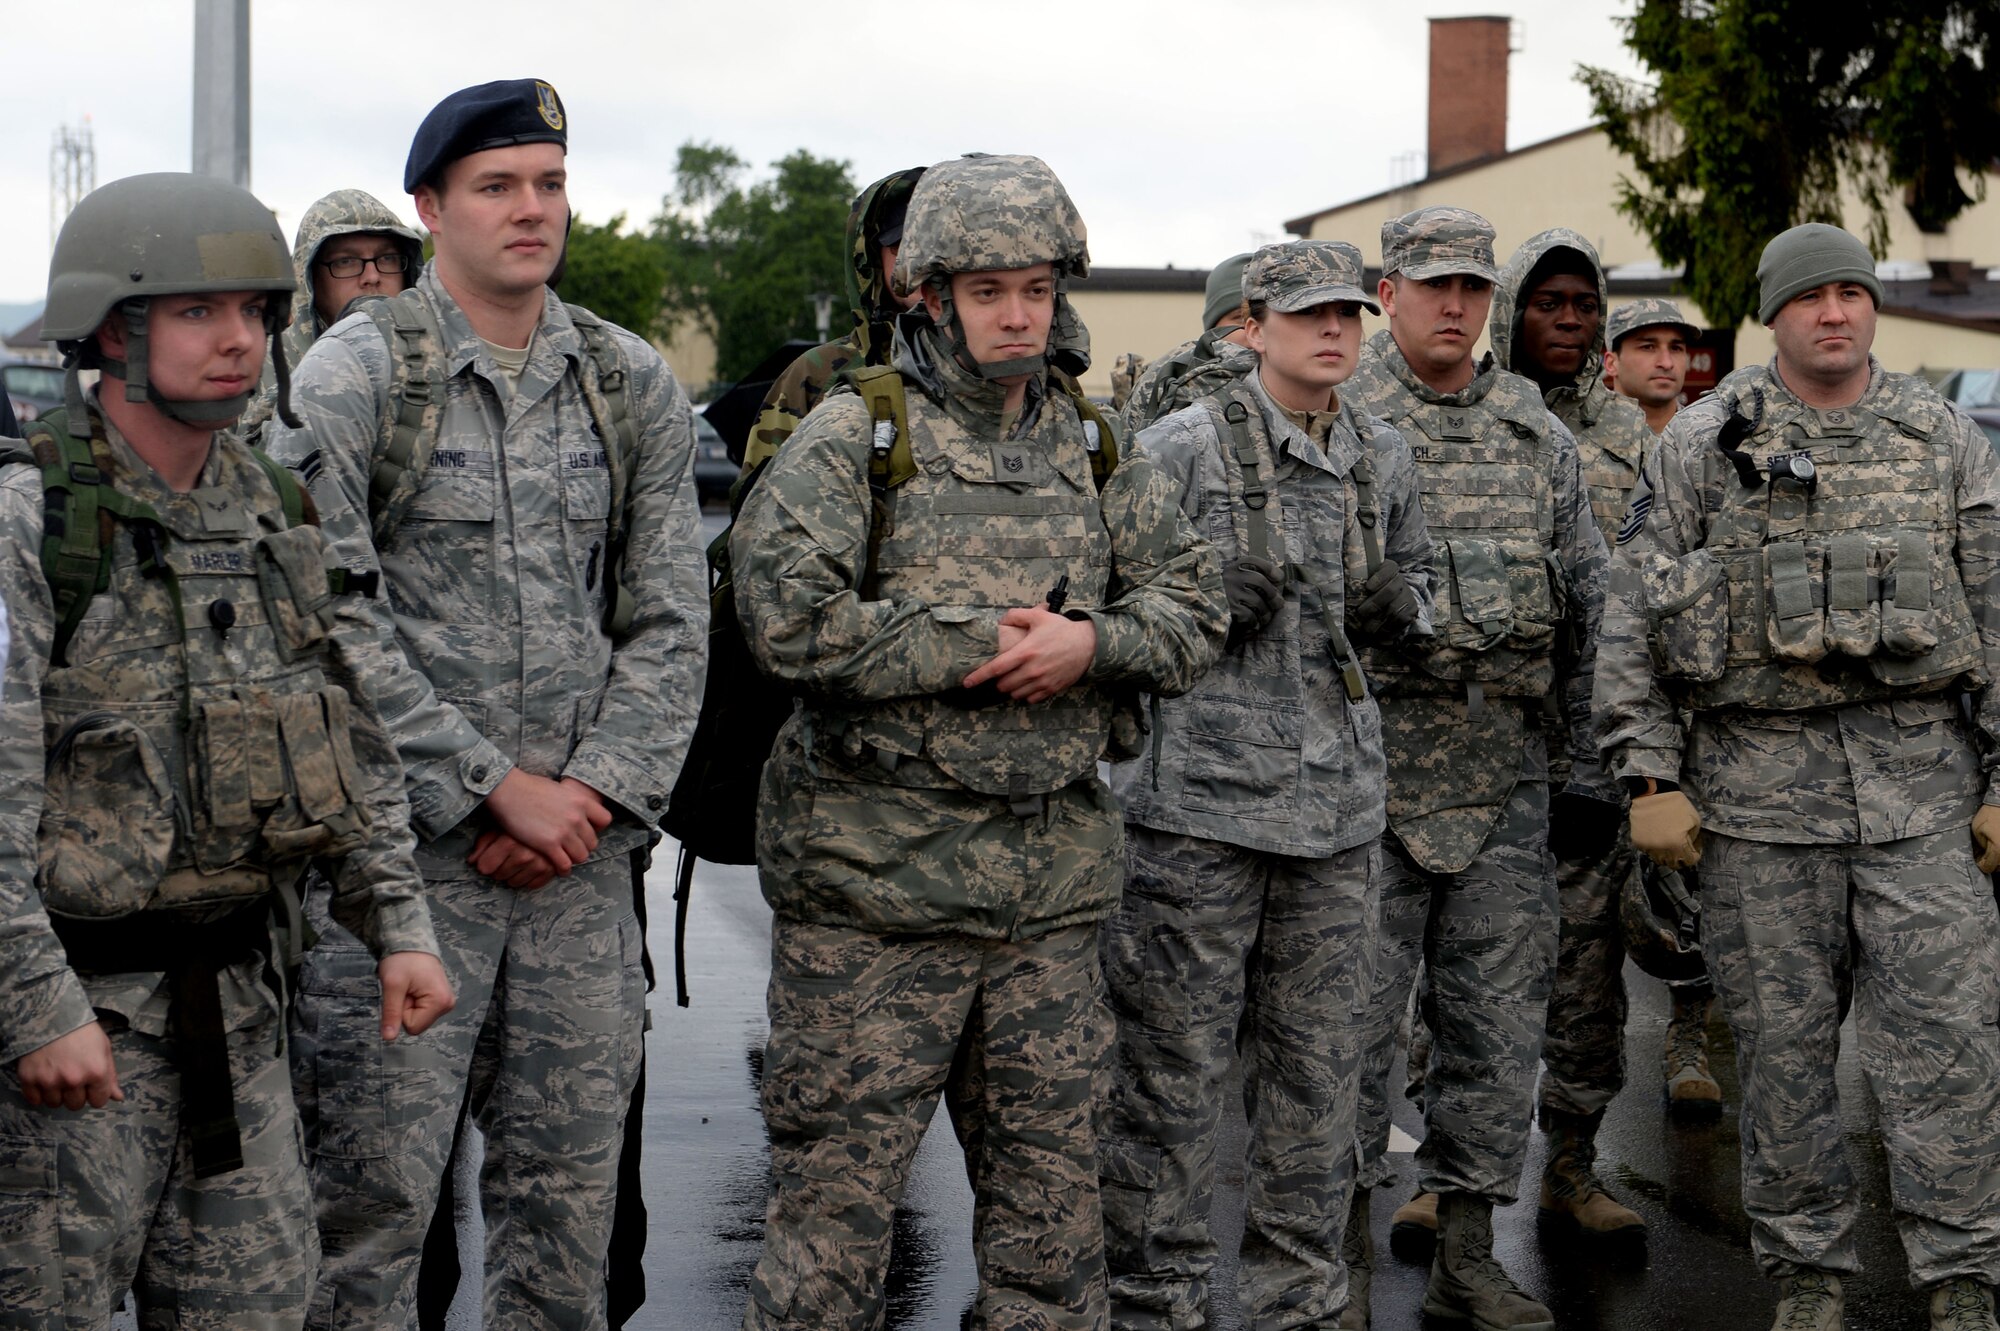 Members of the Spangdahlem community listen to the event coordinator explain the route before the Security Forces Memorial Ruck March on Spangdahlem Air Base, Germany, May 12, 2014. This event kicked off a week-long celebration of National Police Week, a U.S. nationally-recognized observance that honors fallen police officers. (U.S. Air Force photo by Senior Airman Alexis Siekert)